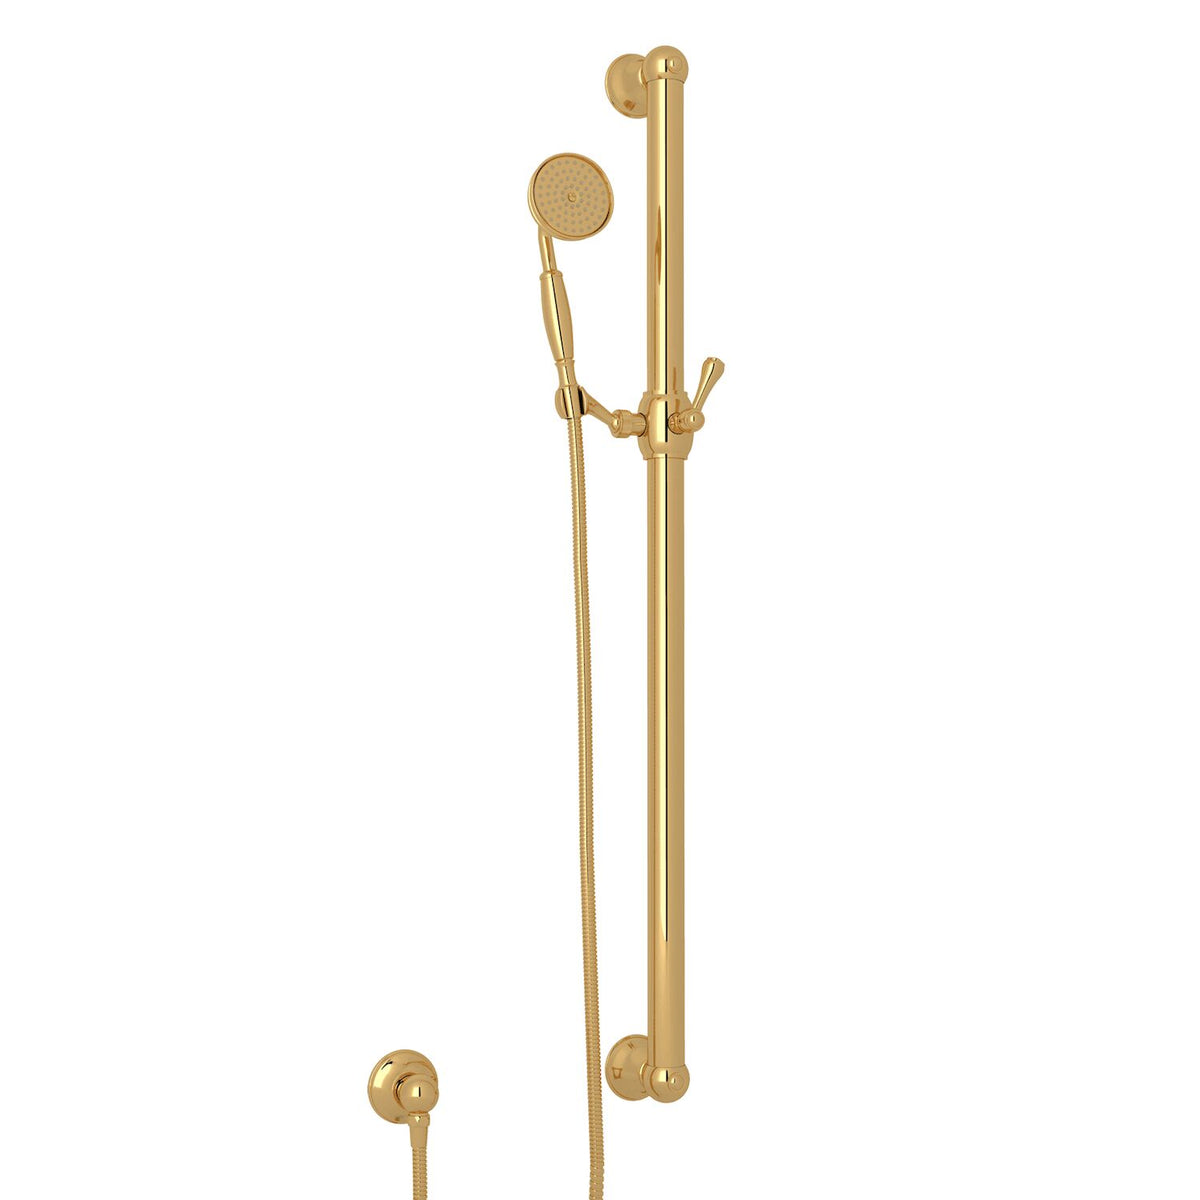 ROHL® HANDSHOWER SET WITH 39" GRAB BAR AND SINGLE-FUNCTION HANDSHOWER